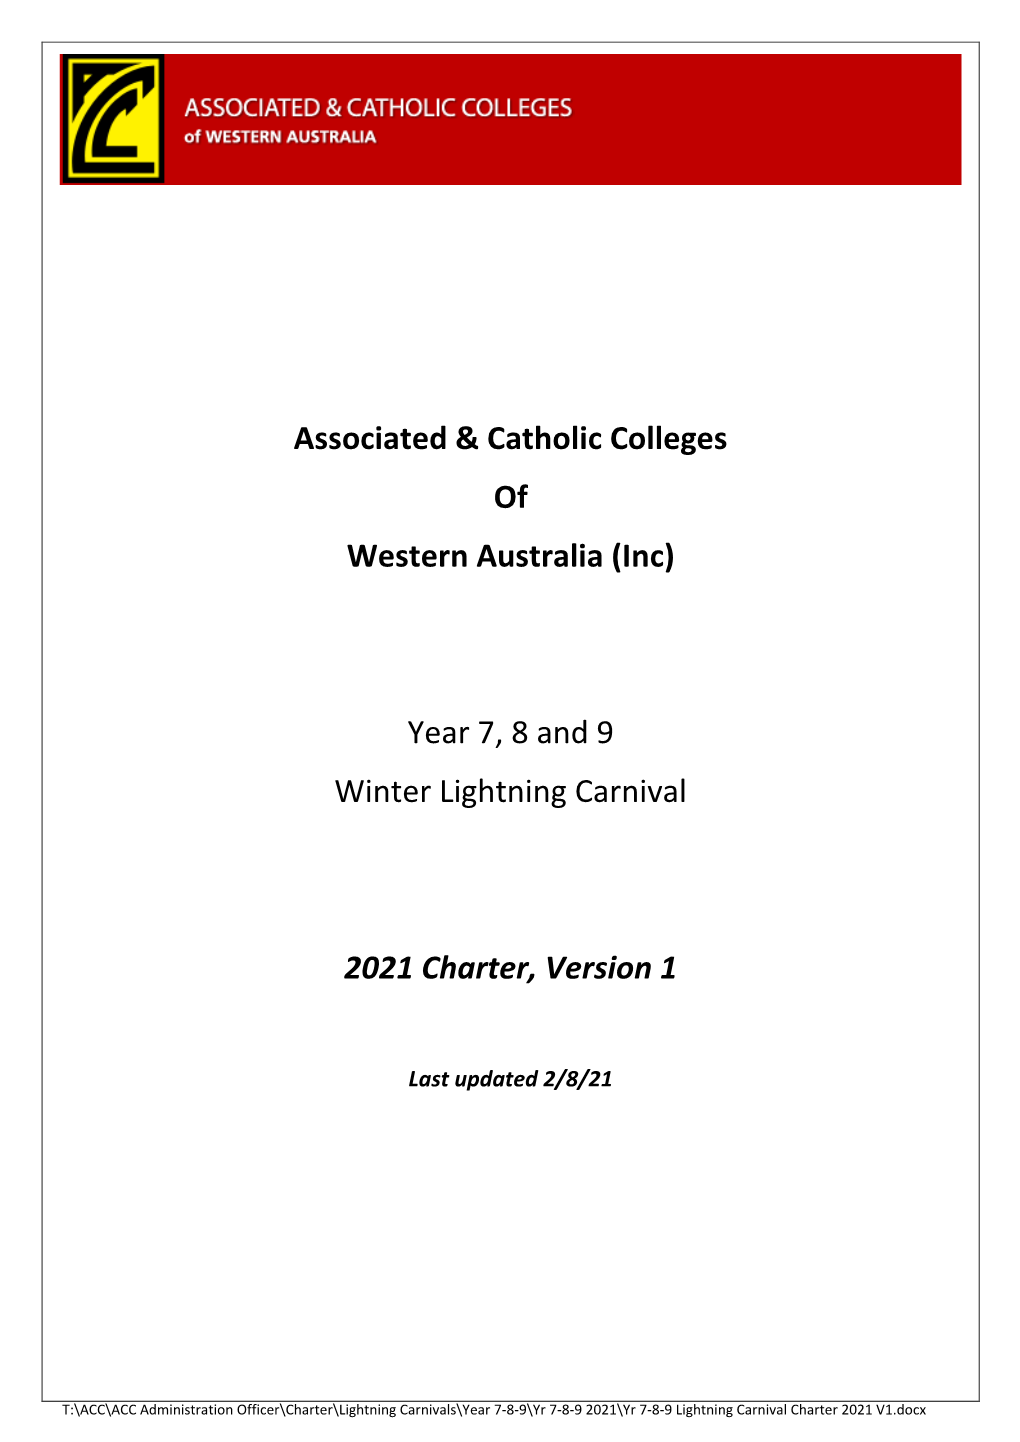 Associated & Catholic Colleges of Western Australia (Inc) Year 7, 8 and 9 Winter Lightning Carnival 2021 Charter, Version 1